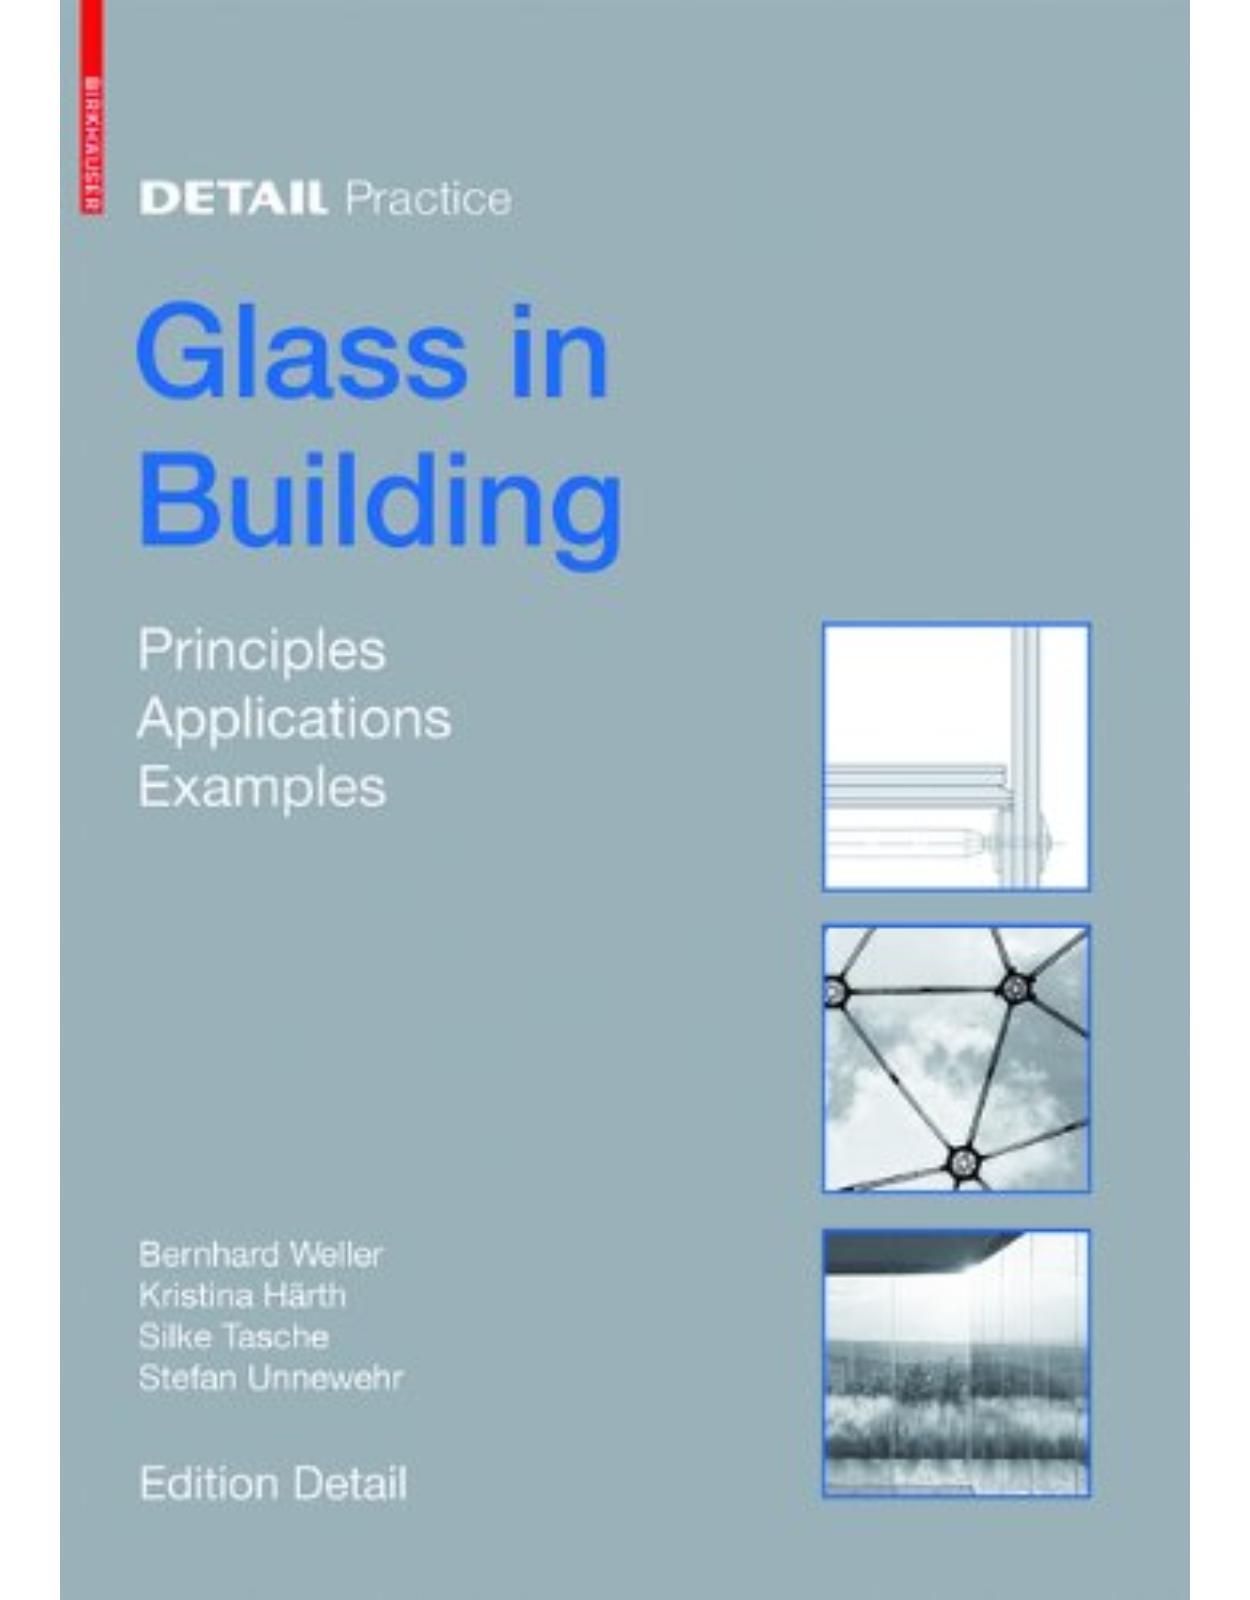 Glass in Building